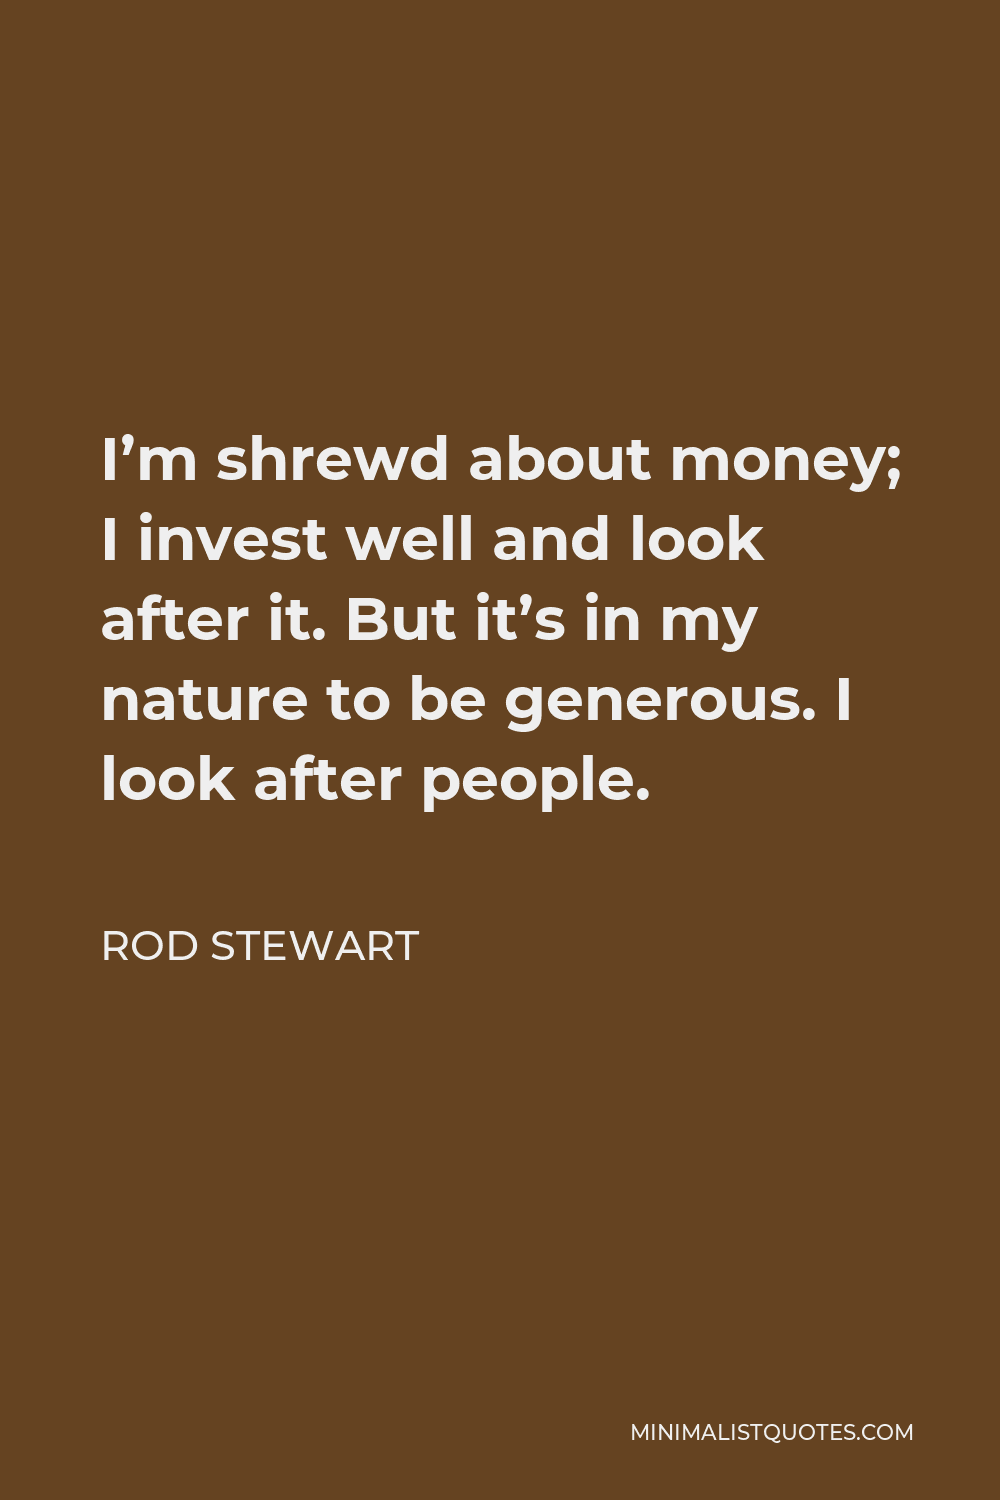 Rod Stewart Quote - I’m shrewd about money; I invest well and look after it. But it’s in my nature to be generous. I look after people.